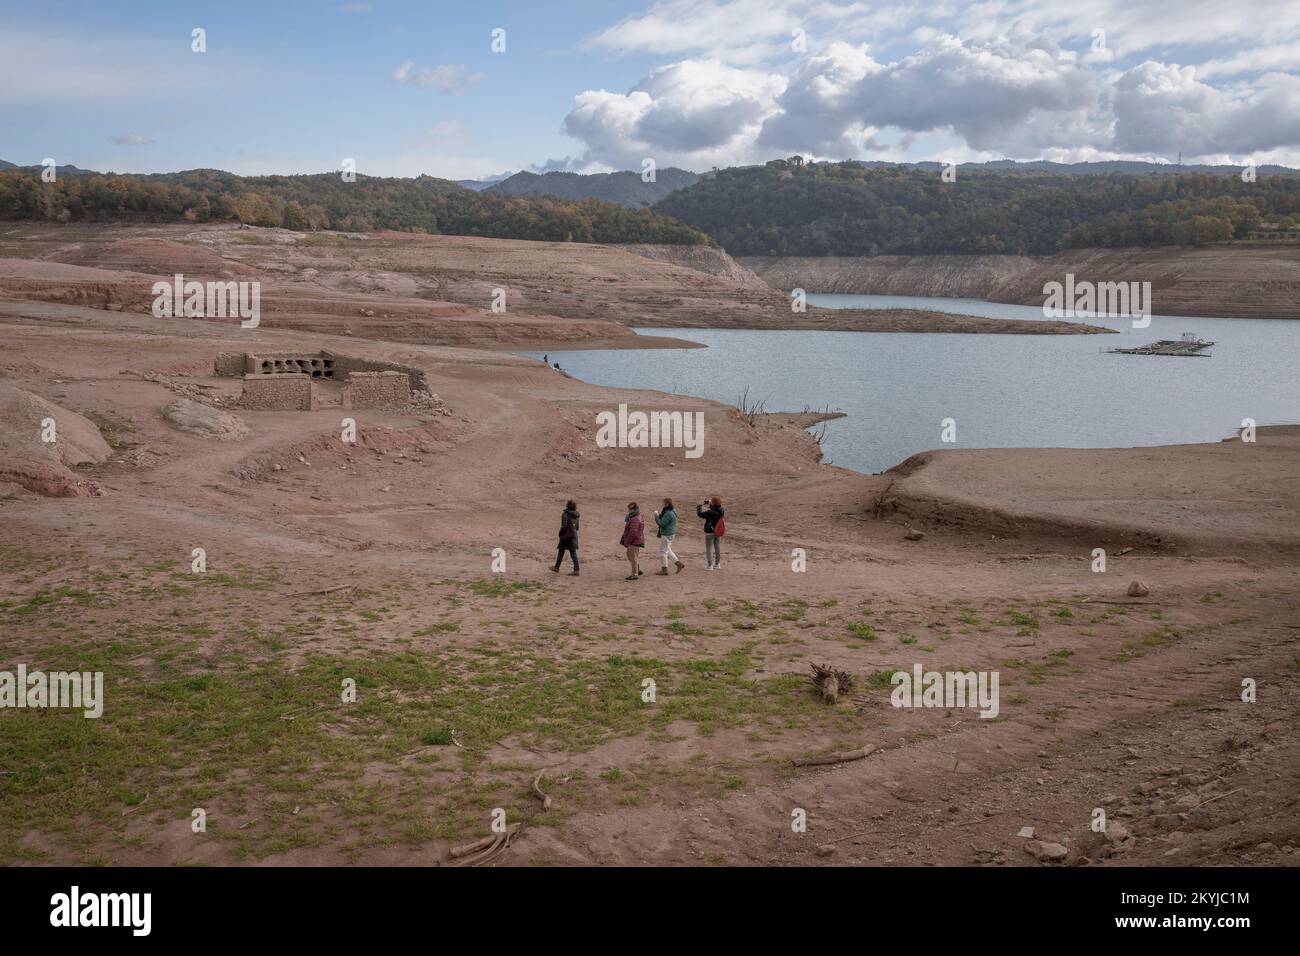 Sau reservoir at 30% of its water capacity.  Four women go to what was the new cemetery of Sant Romà de Sau now discovered due to the lack of water in the swamp in Sau swamp, Vilanova de Sau, Spain, on November 29, 2022.  © Joan Gosa 2022/Alamy Stock Photo